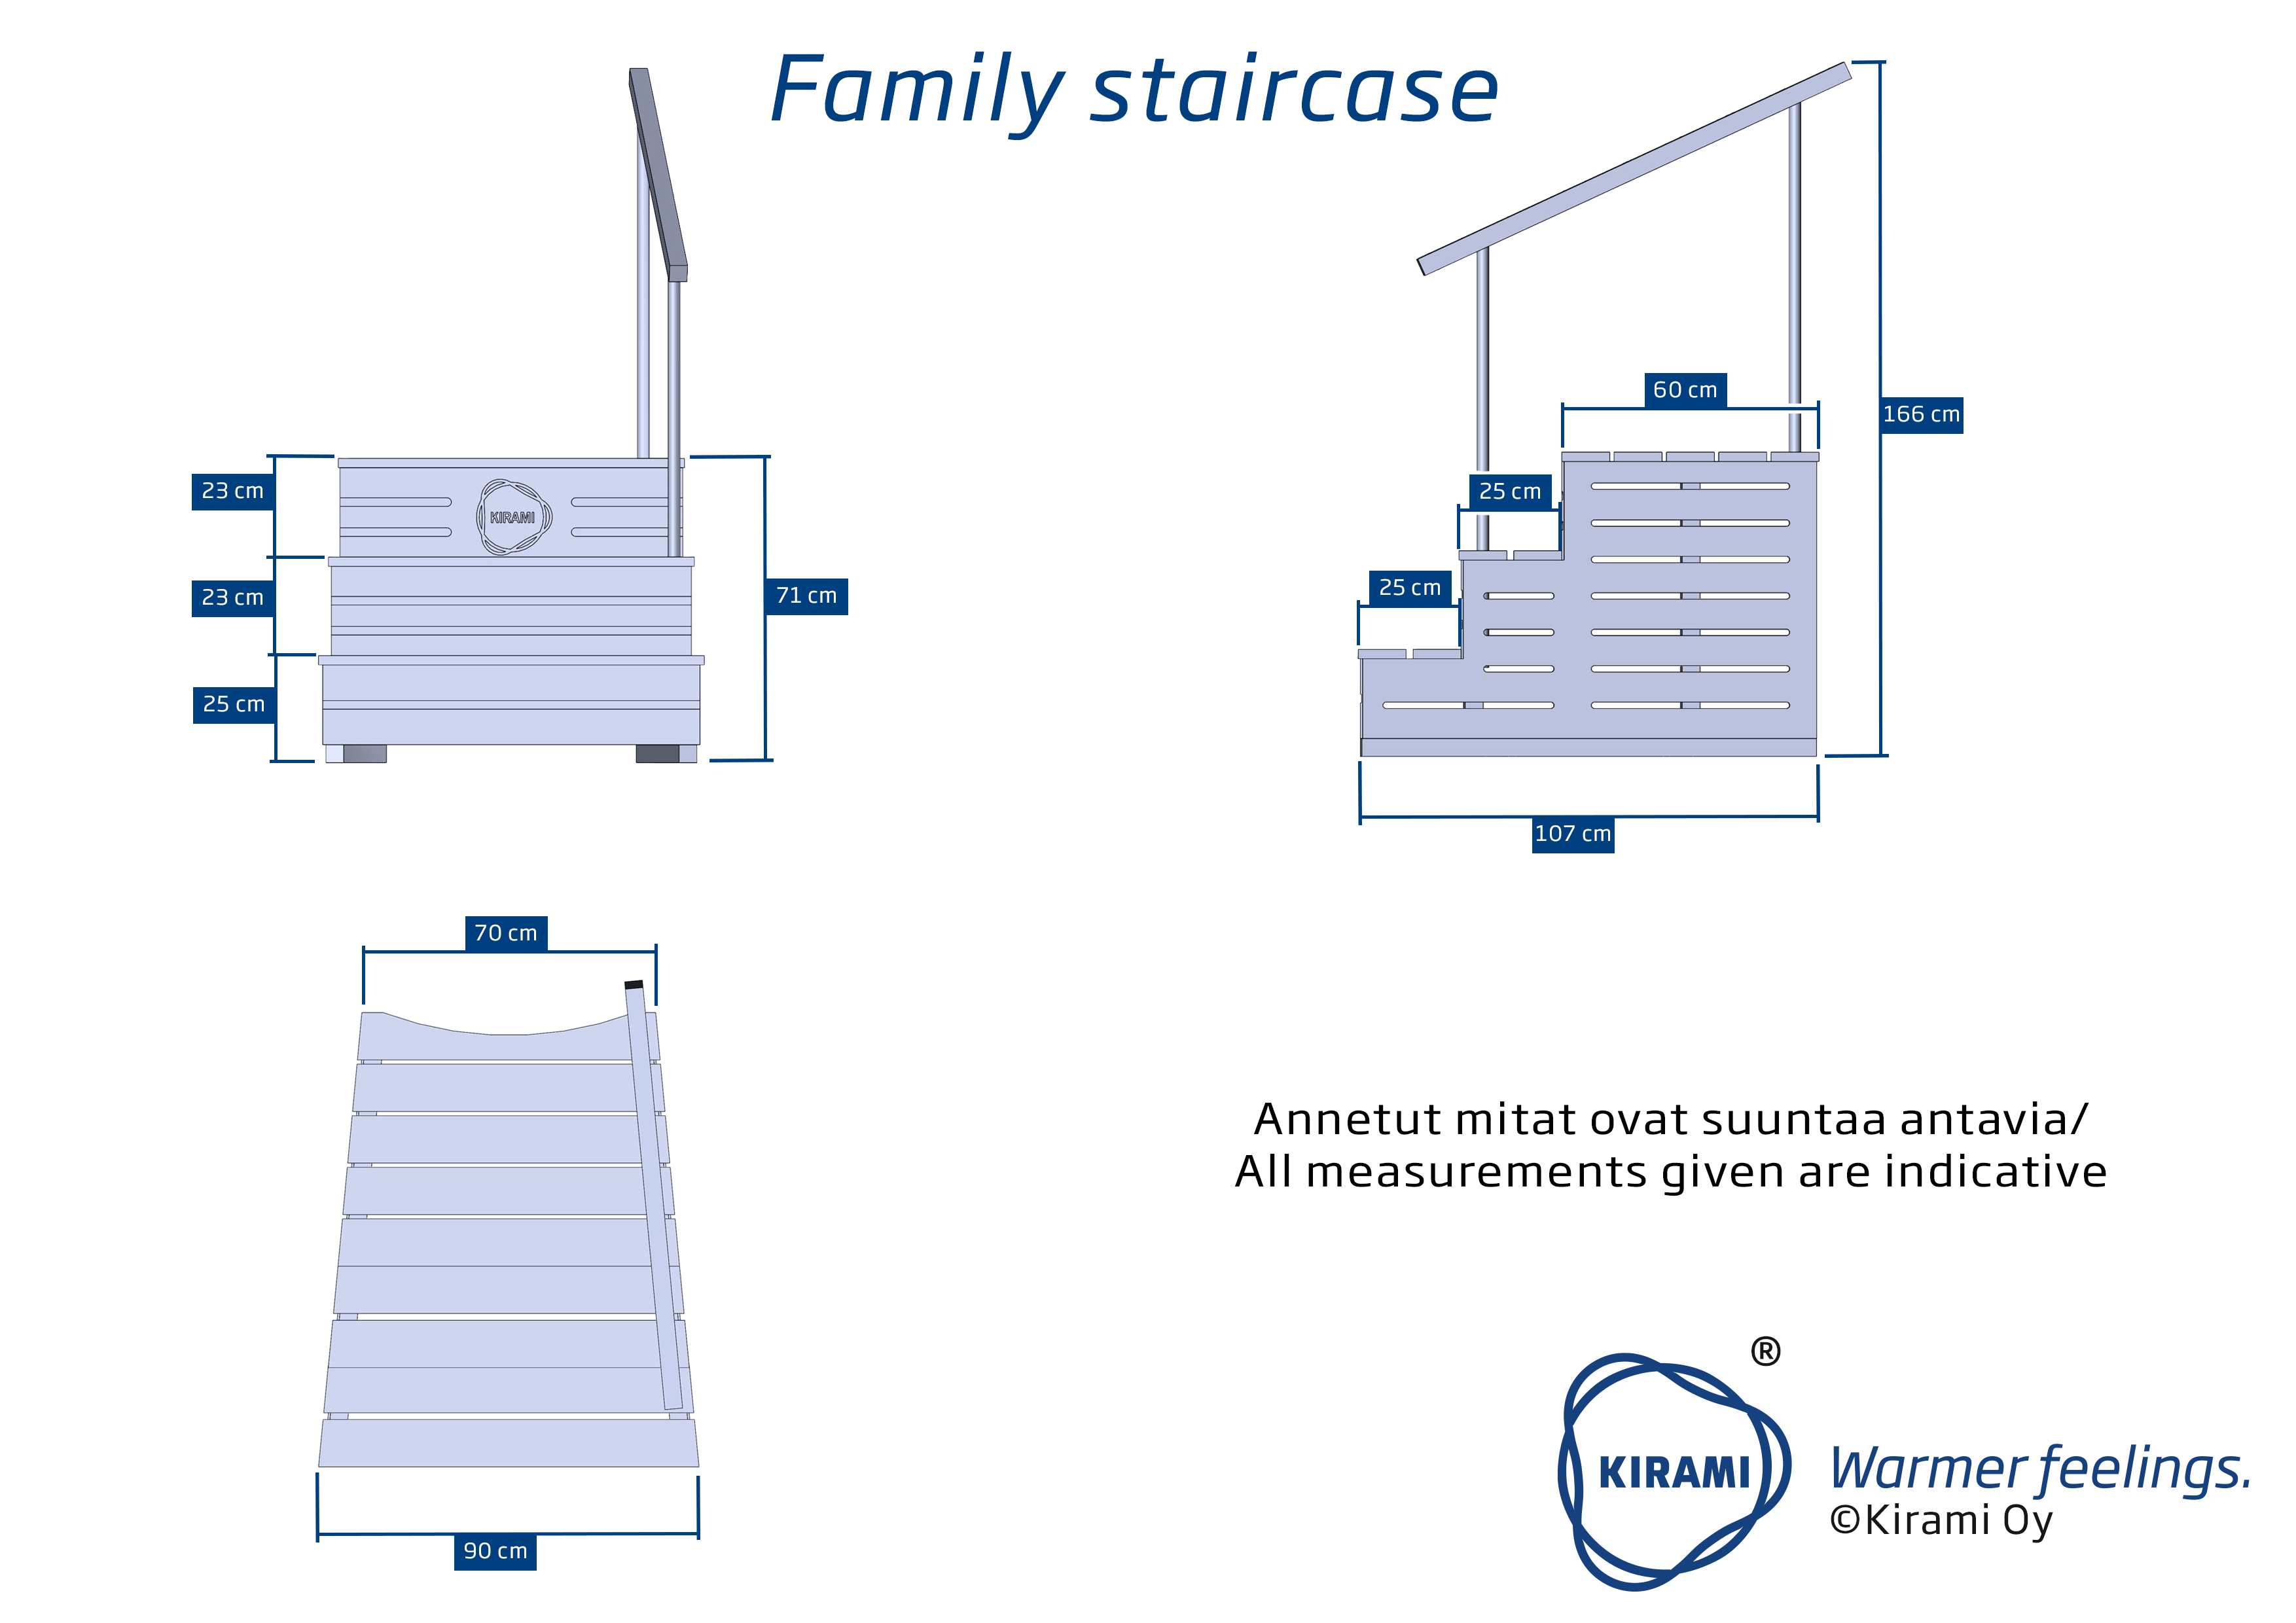 Family staircase dimensionale tekning